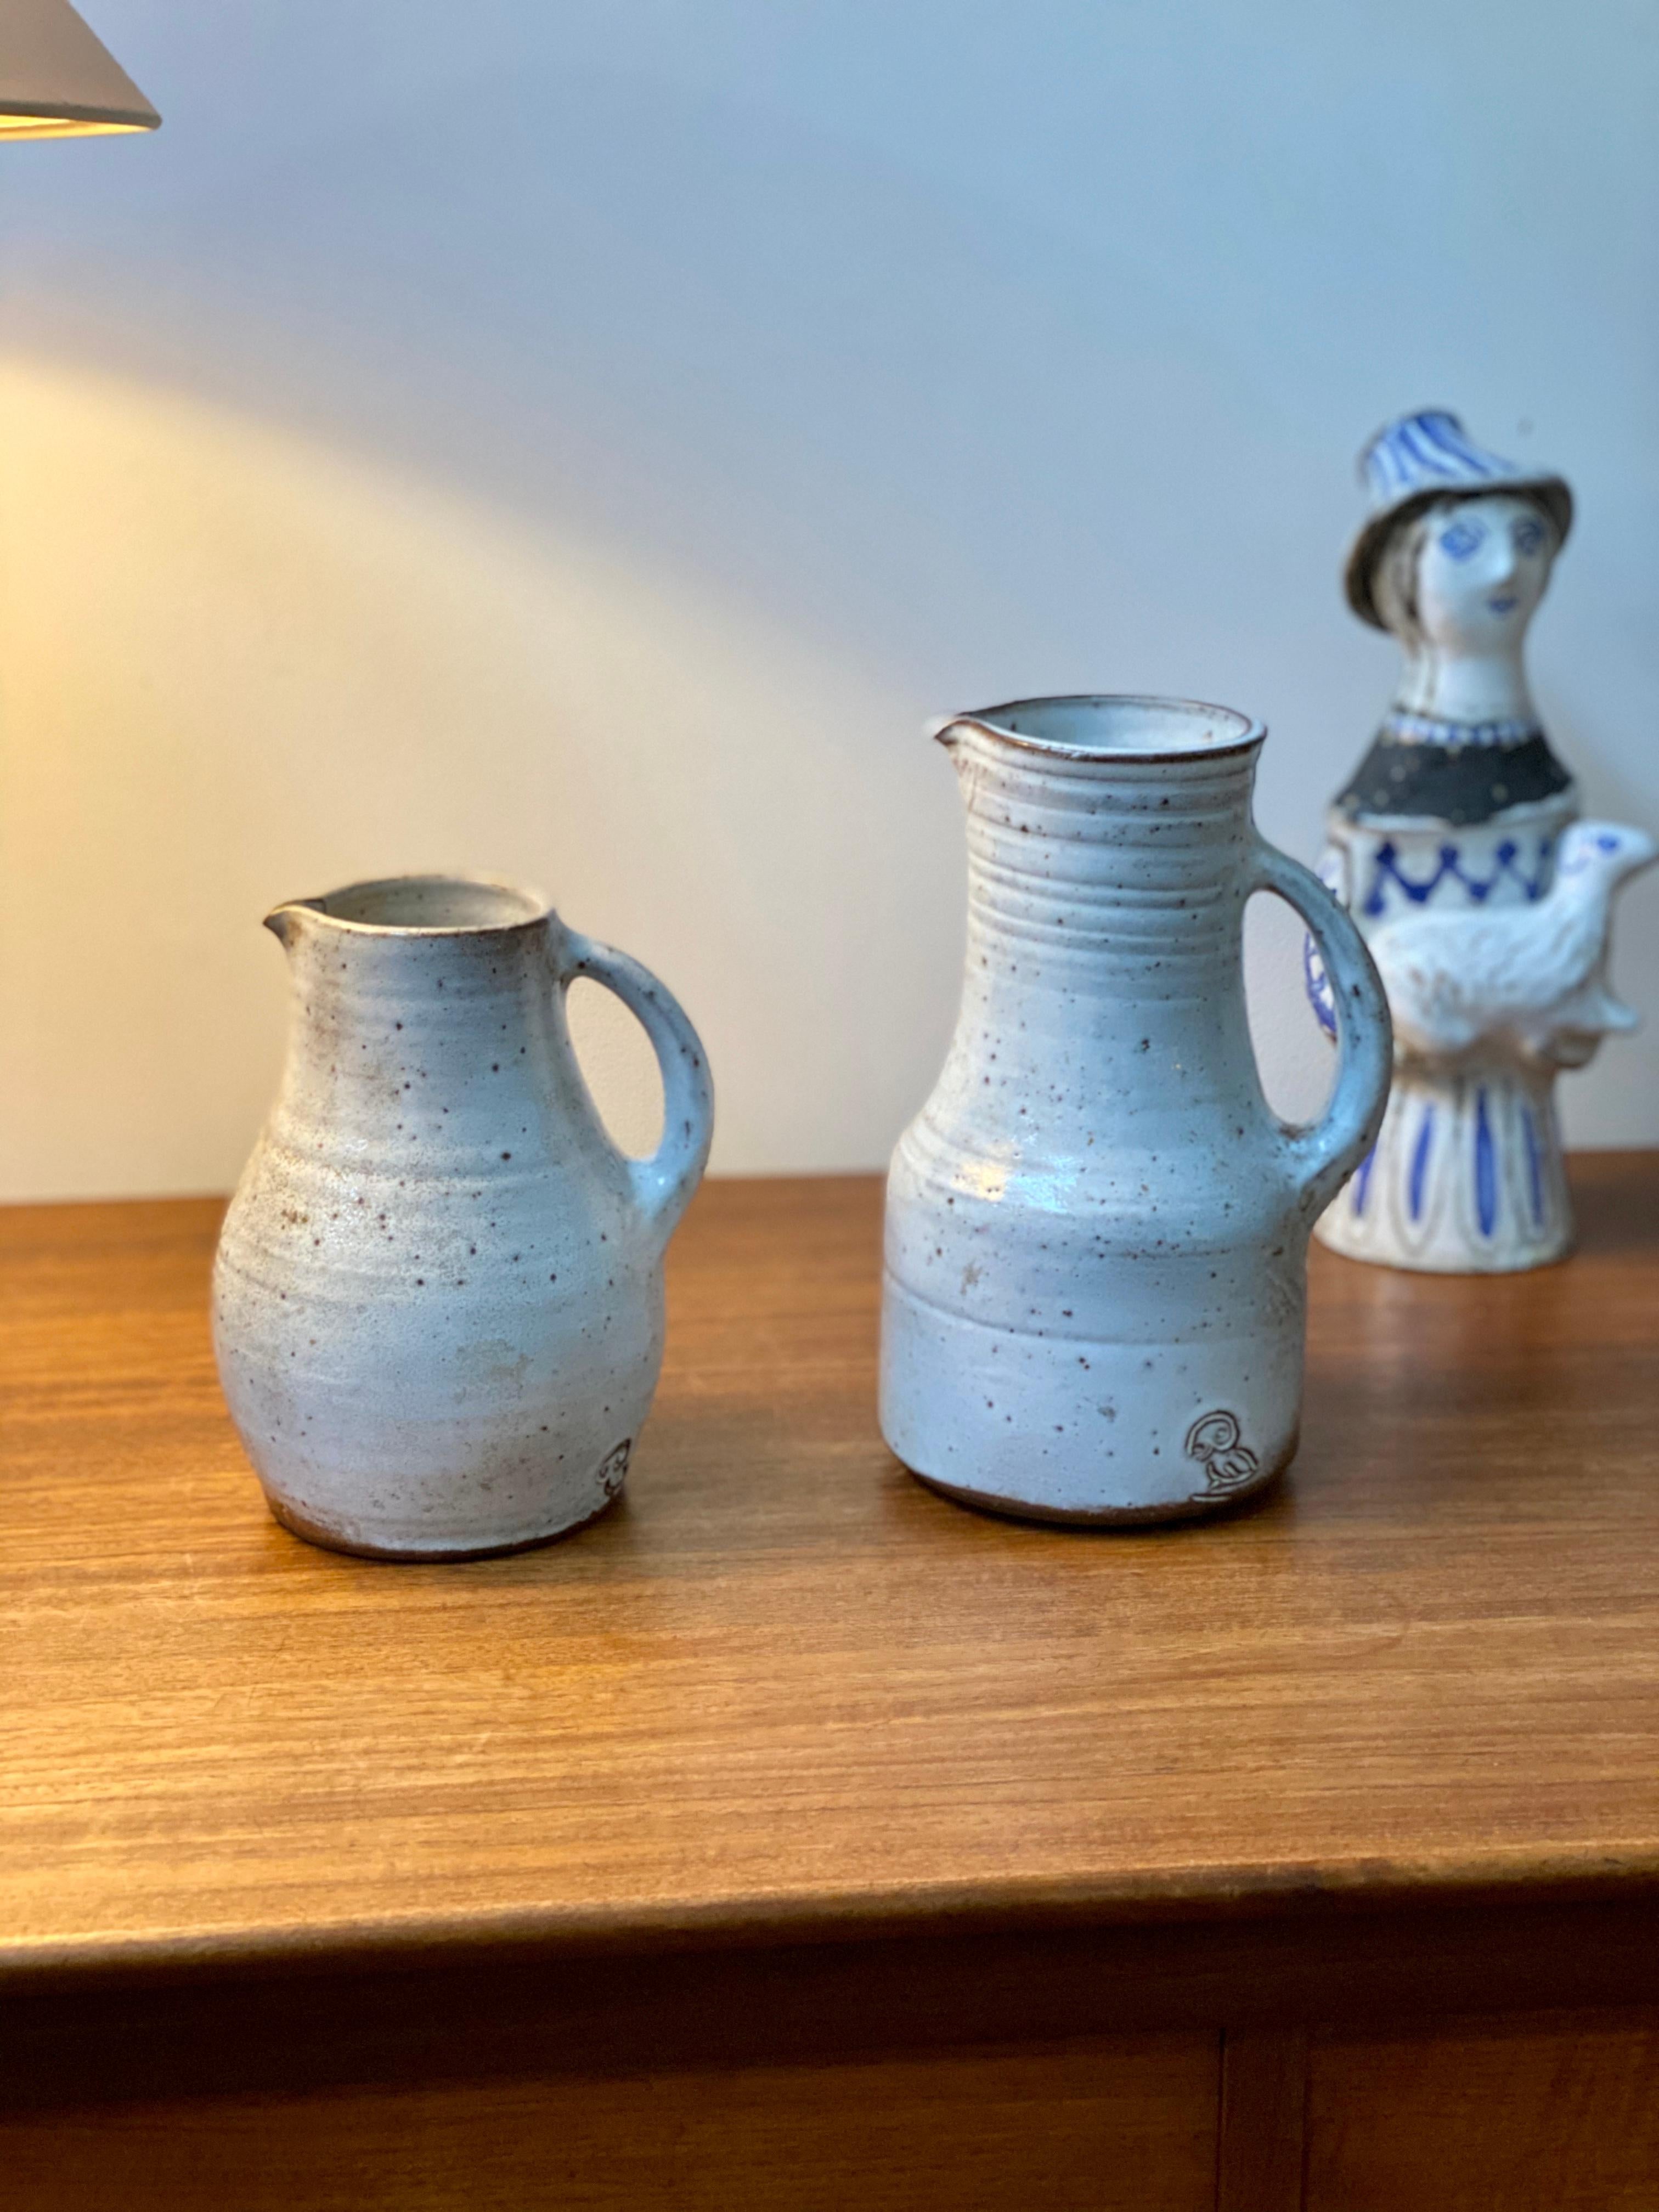 Midcentury French ceramic pitcher by Jeanne & Norbert Pierlot (circa 1960s). With an off-white base and brown sandstone accents, this rustic pitcher with handle and spout is a delight. The glazed parts that are predominantly off-white are lustrous